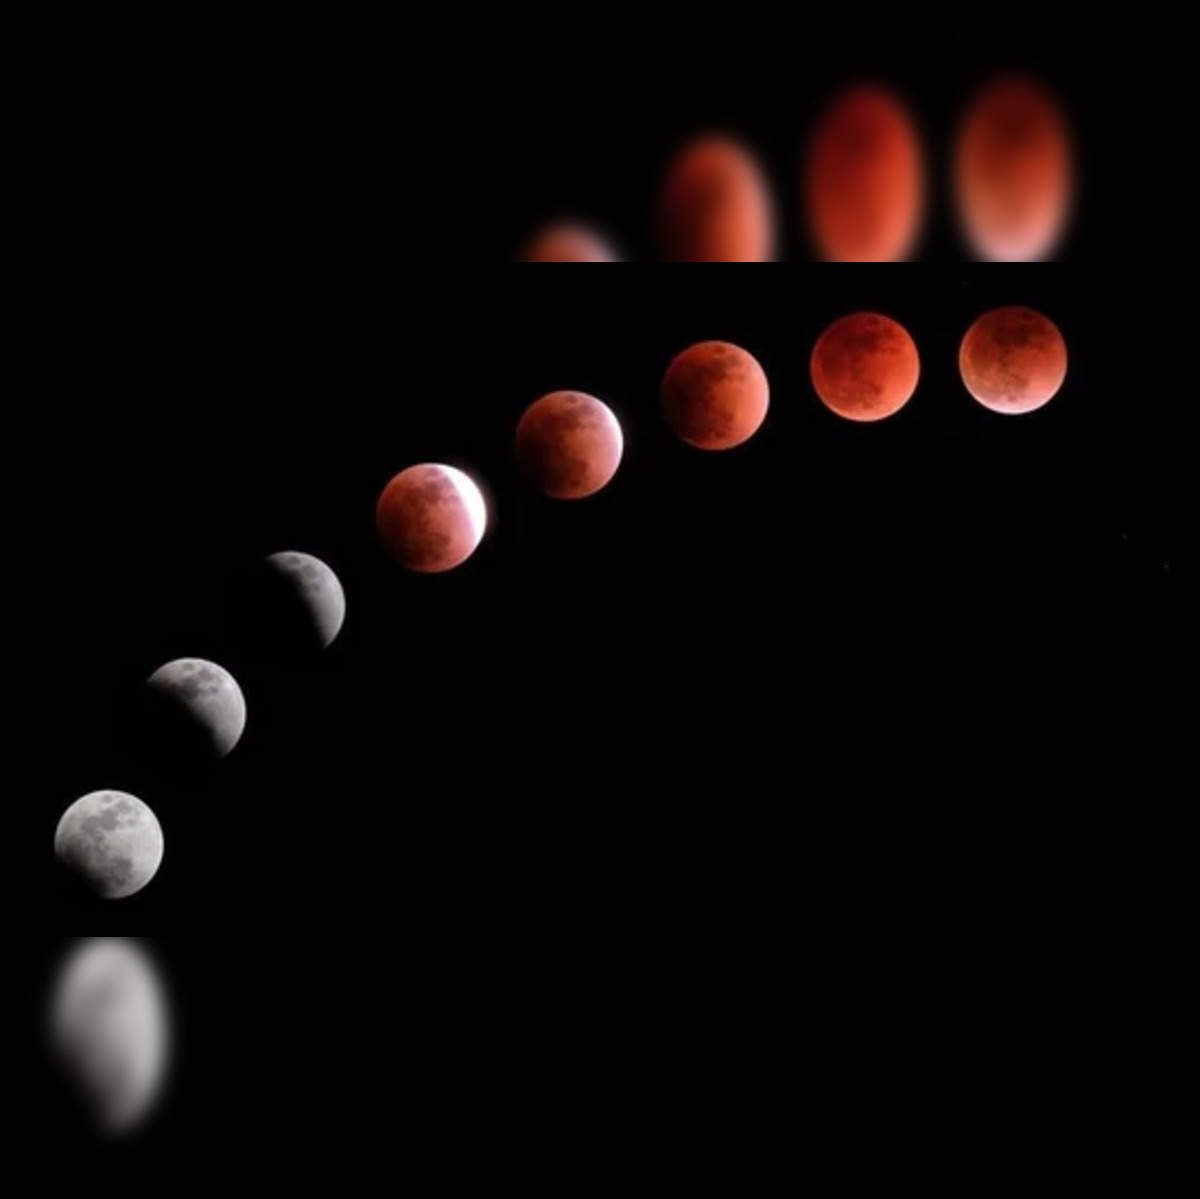 Blood Moon total lunar eclipse 2022: How and when to watch